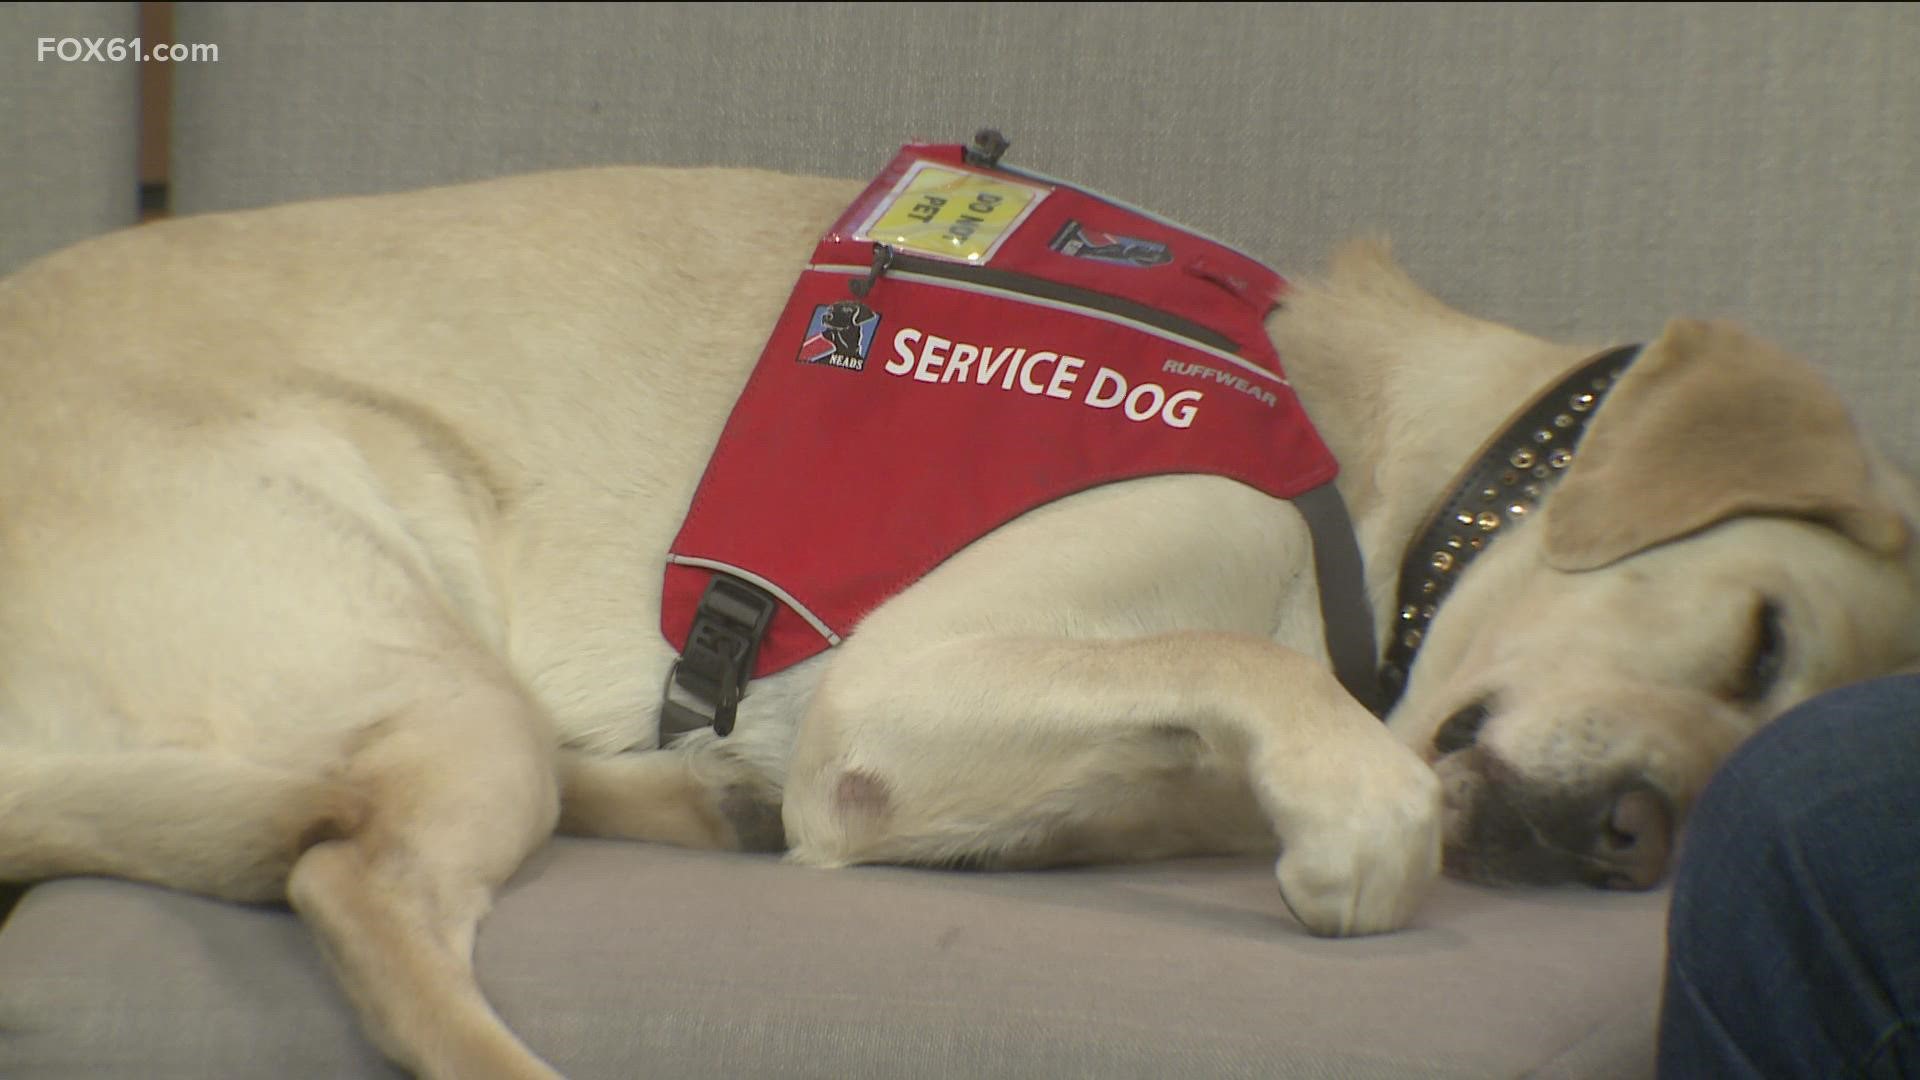 Katelynn Steinke tours the country to share how her service dog Jones helps her in her everyday life. FOX61/TEGNA are sponsoring a NEADS puppy.